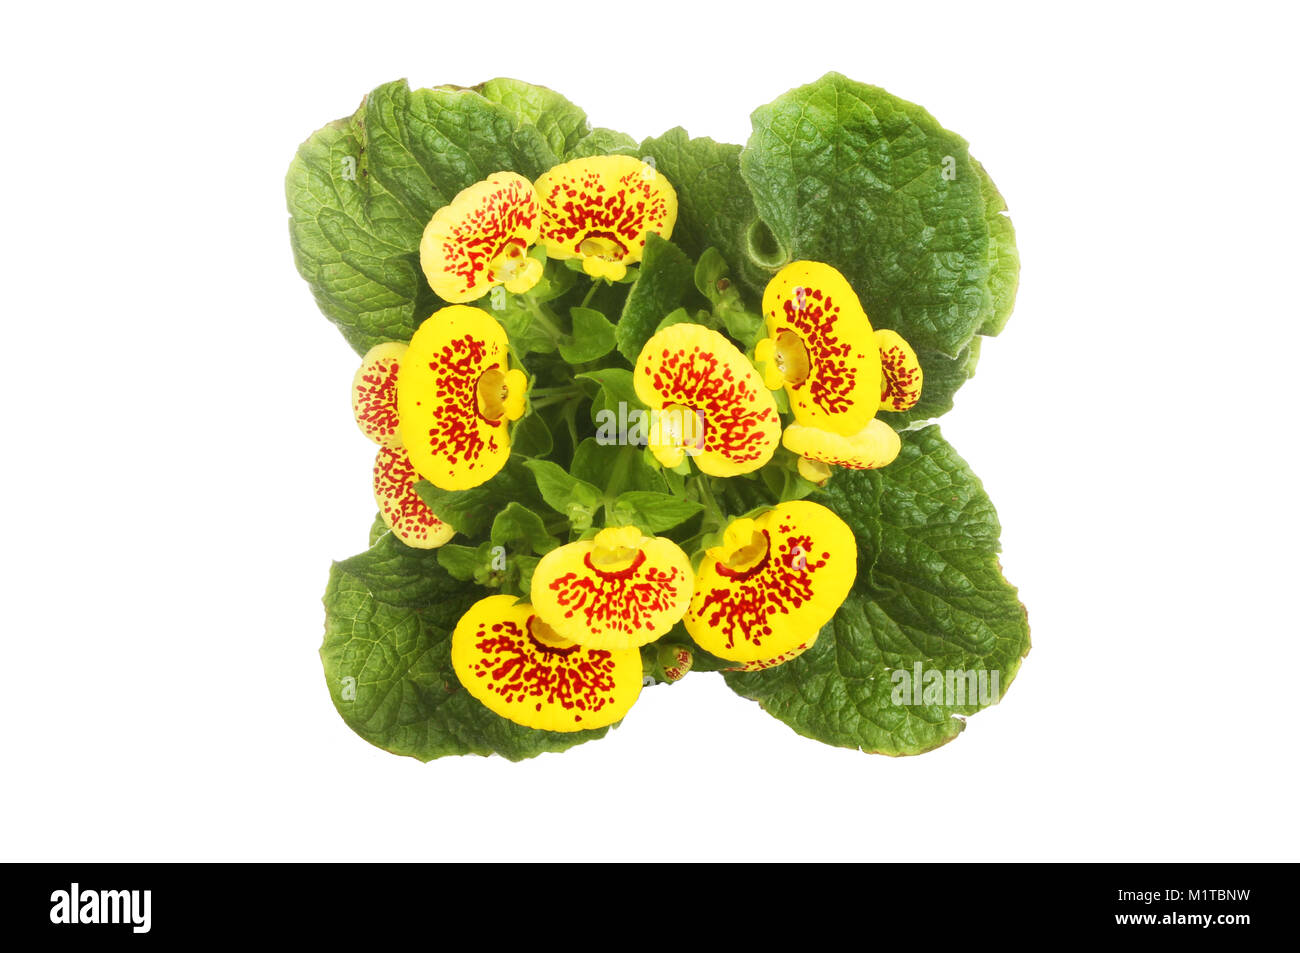 Flowering Calceolaria plant top view isolated against white Stock Photo